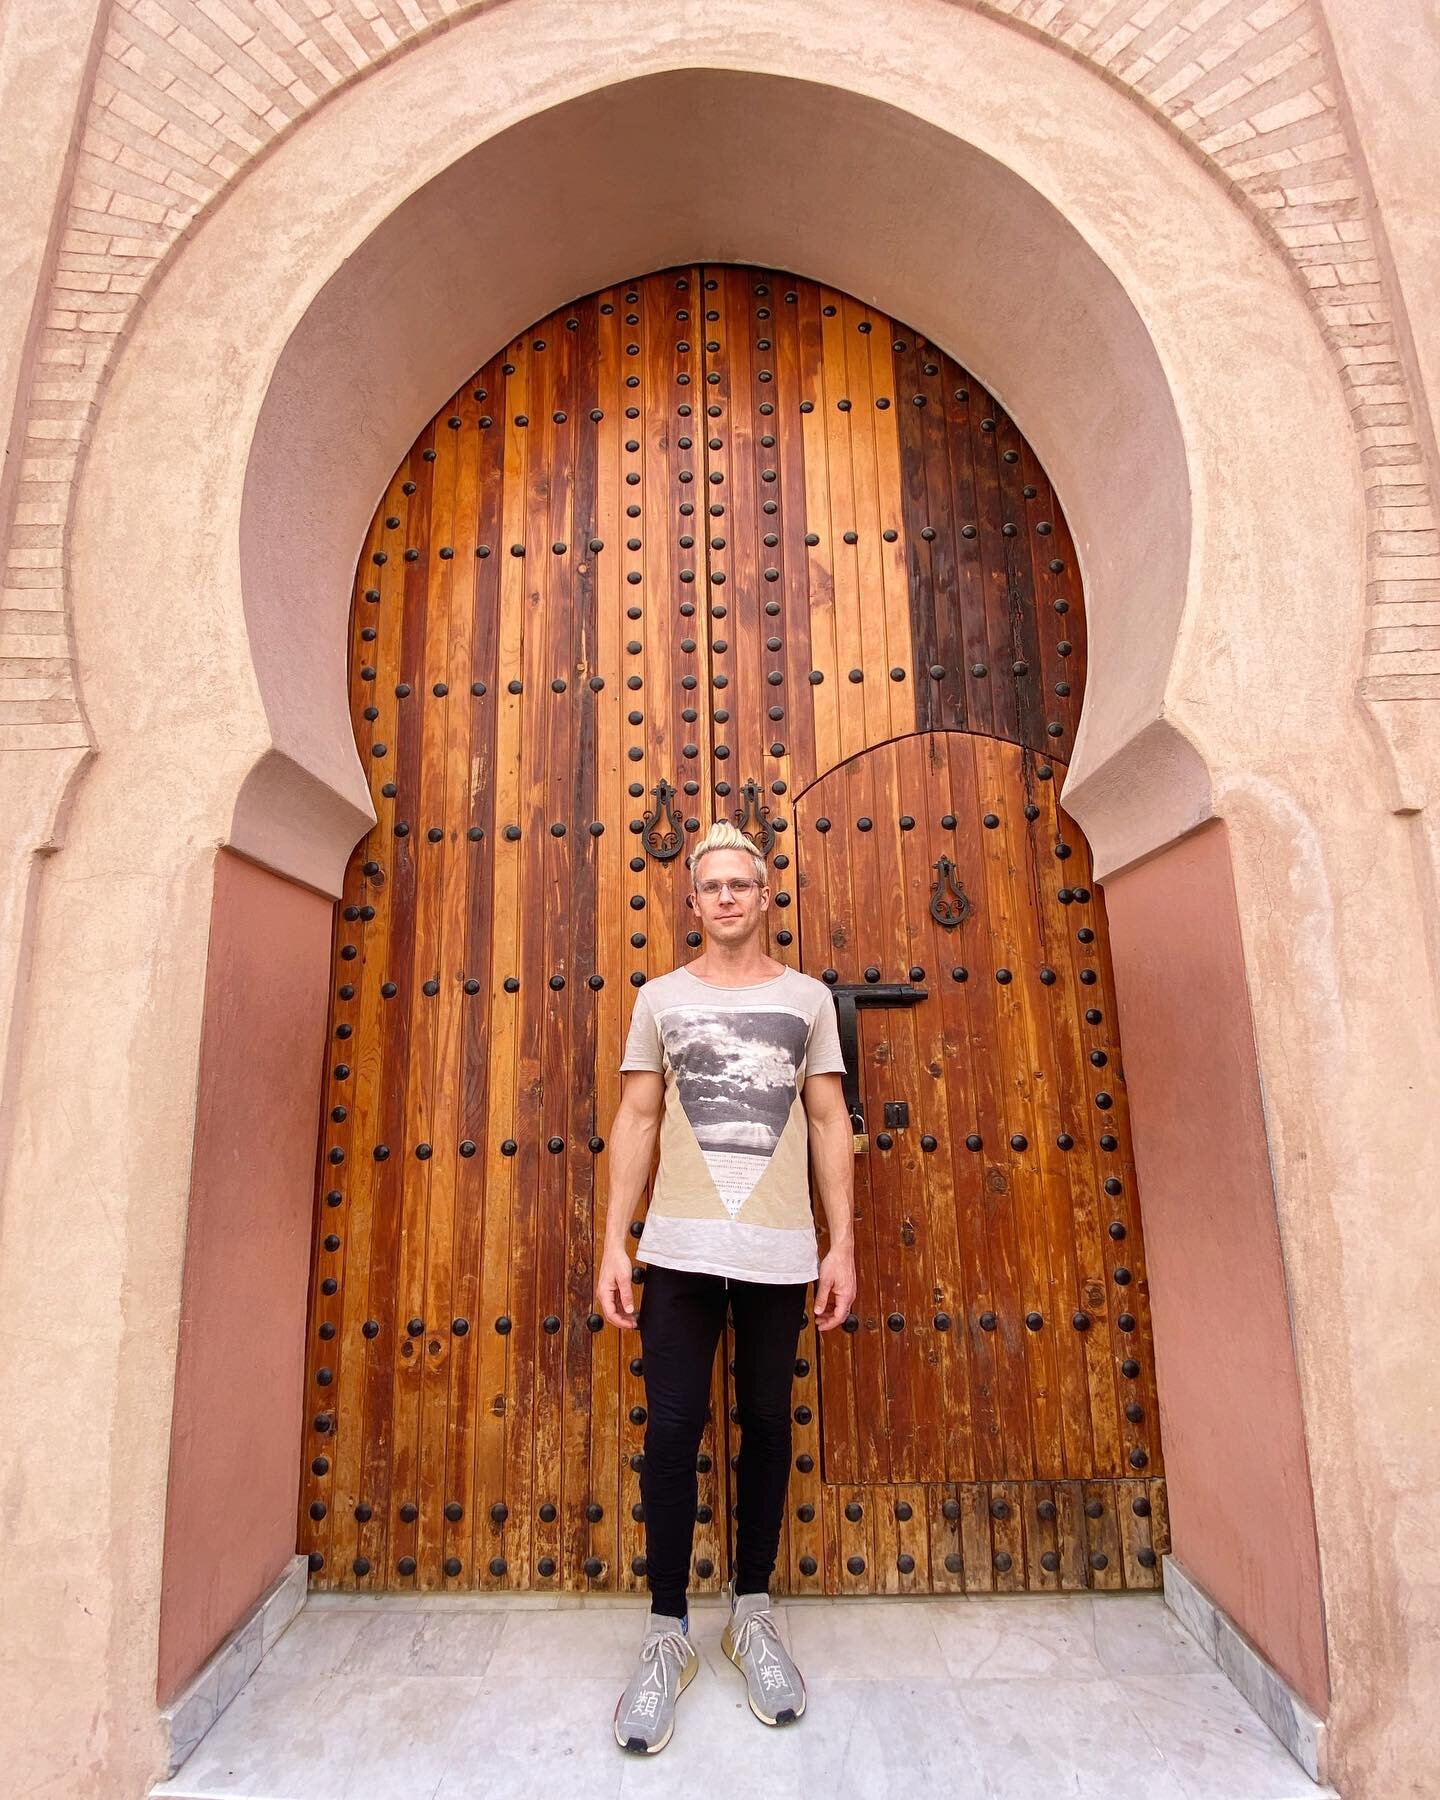 Morocco, day 1. It feels so great to get out and experience the world again. Experiencing the culture and people of this country was so life-giving today. And we&rsquo;re just getting started!
.
#moroccotravel #morocco #marrakech